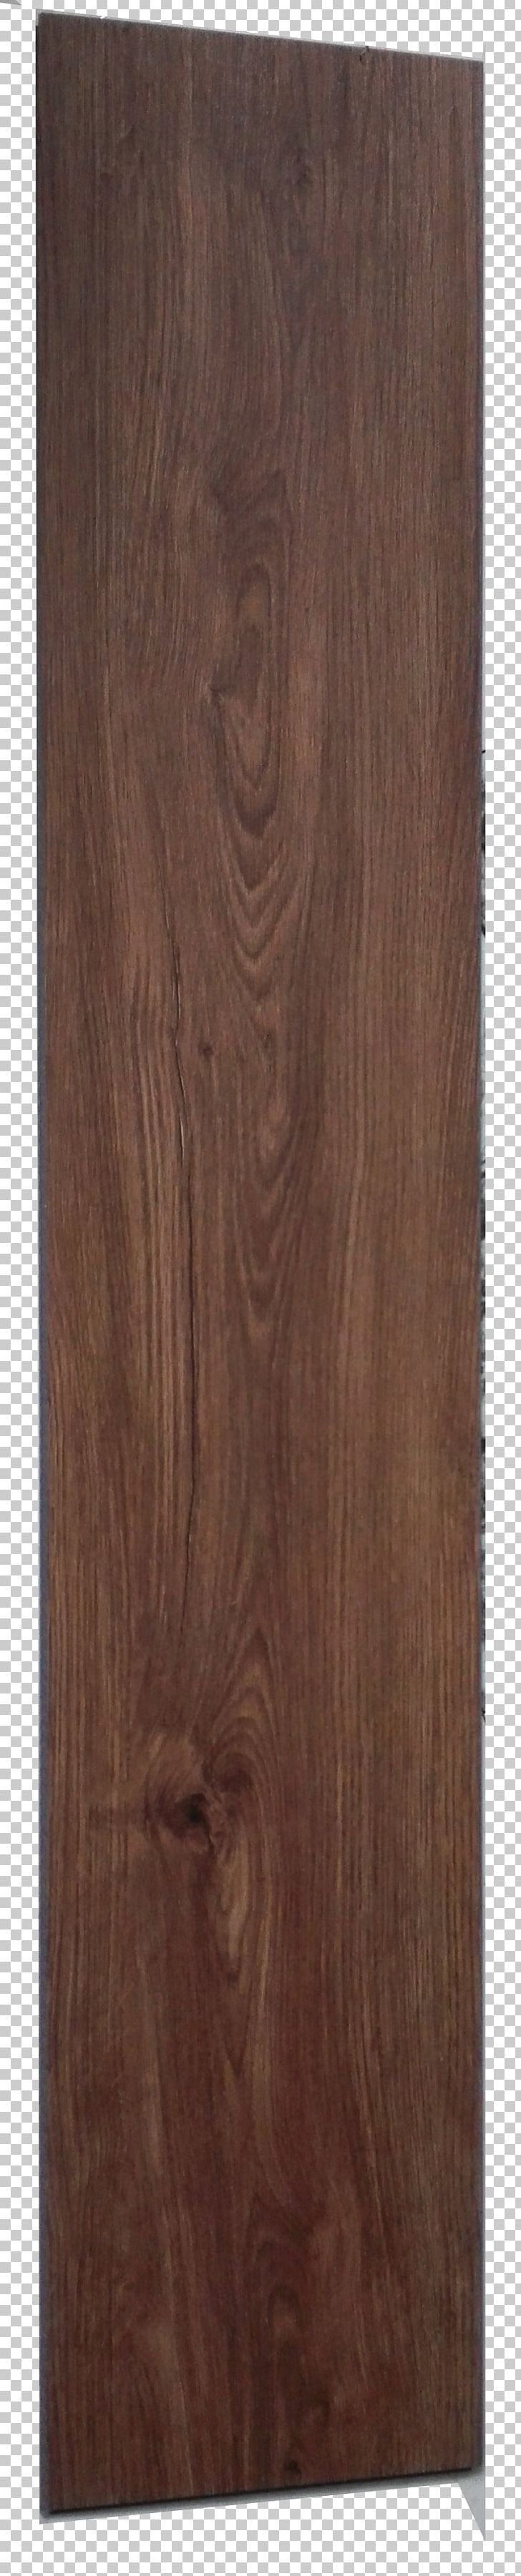 Laminate Flooring Pavement Suelo De PVC Wood PNG, Clipart, Adhesive, Brown, Coating, Contrapiso, Door Free PNG Download